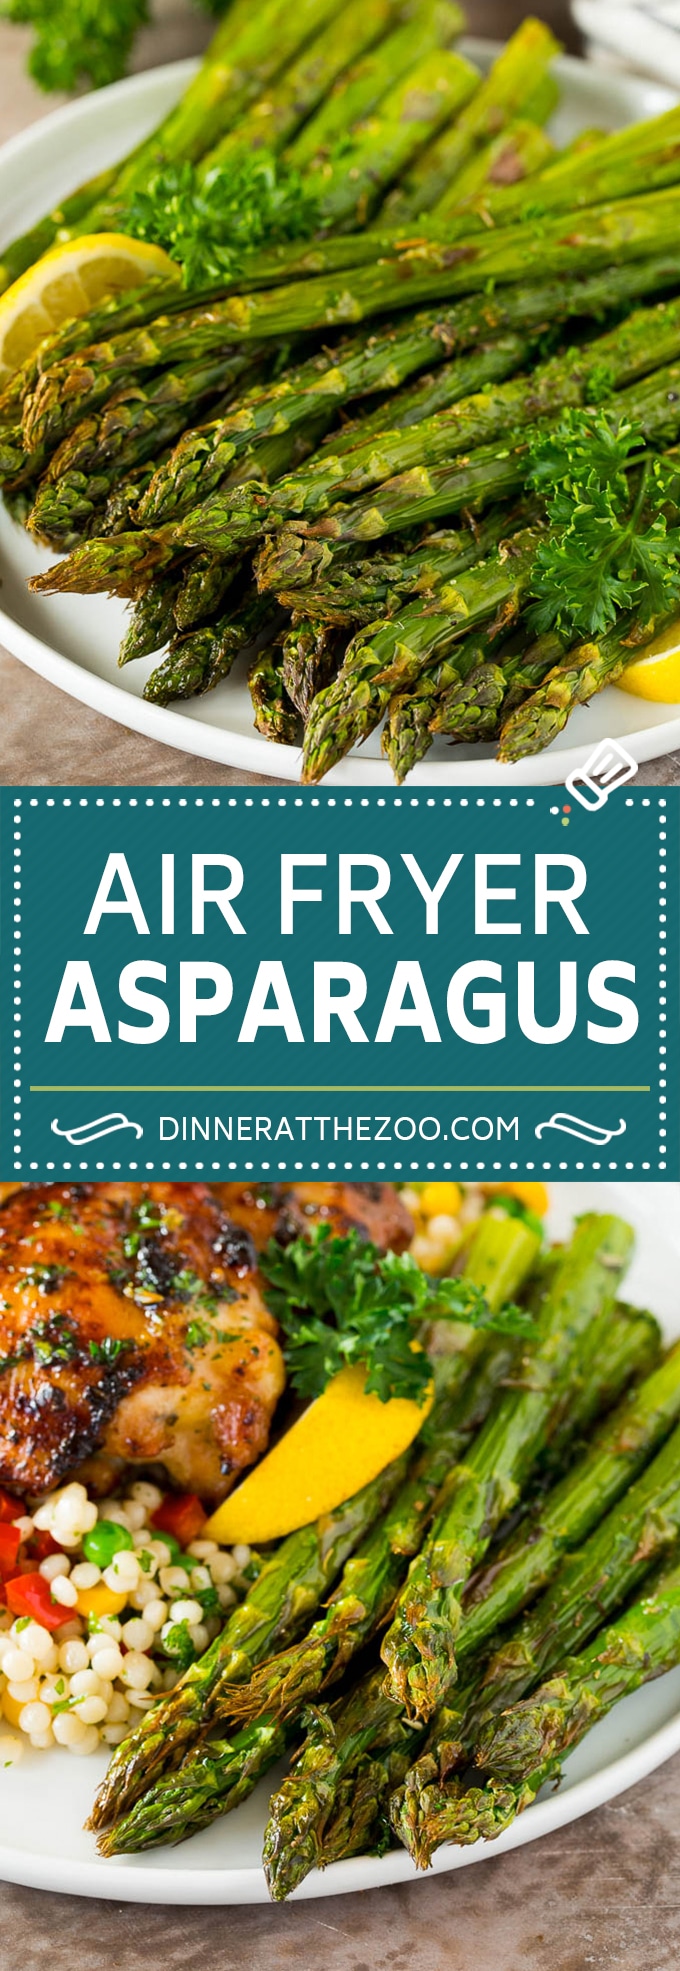 This air fryer asparagus is tender stalks of asparagus coated in olive oil, garlic and an assortment of herbs and seasonings.